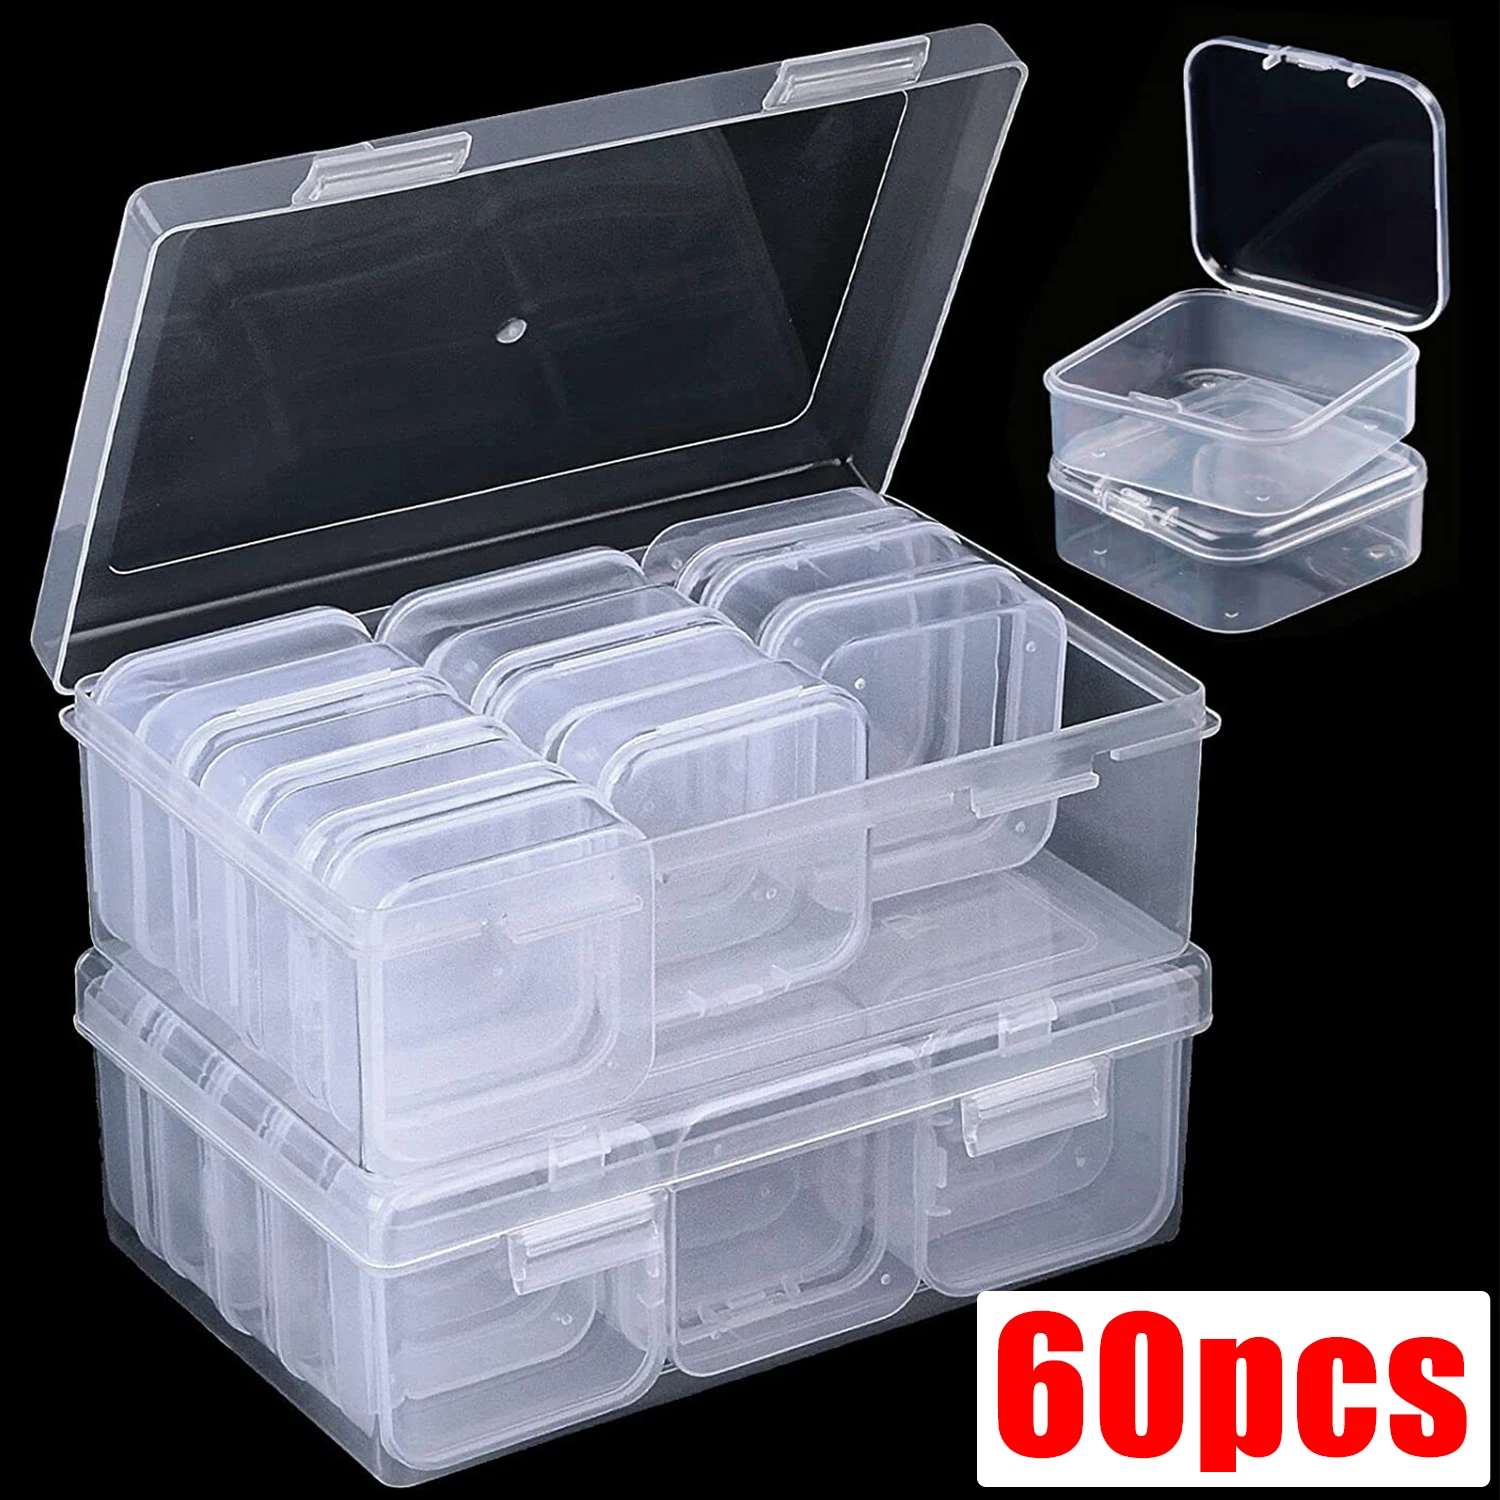 60 Packs Clear Small Plastic Containers Transparent Storage Box with Hinged Lid for Items Crafts Jewelry Package Clear Cases l20 w15 h4 8cm jewelry gift packaging box jewellery organizer with clear glass lid wrapped high level various colors velvet